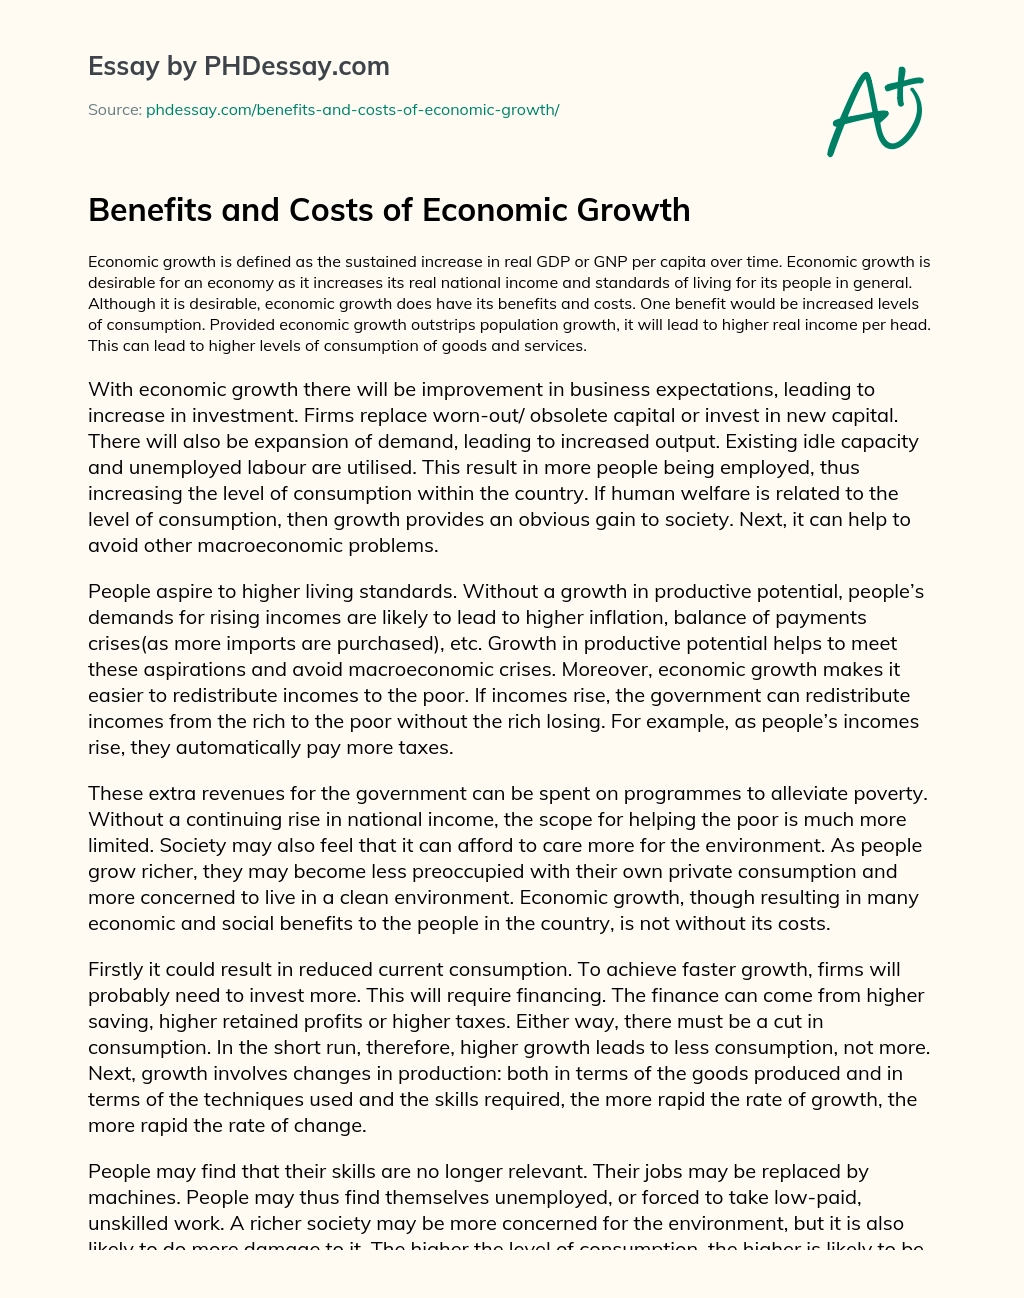 Benefits and Costs of Economic Growth essay